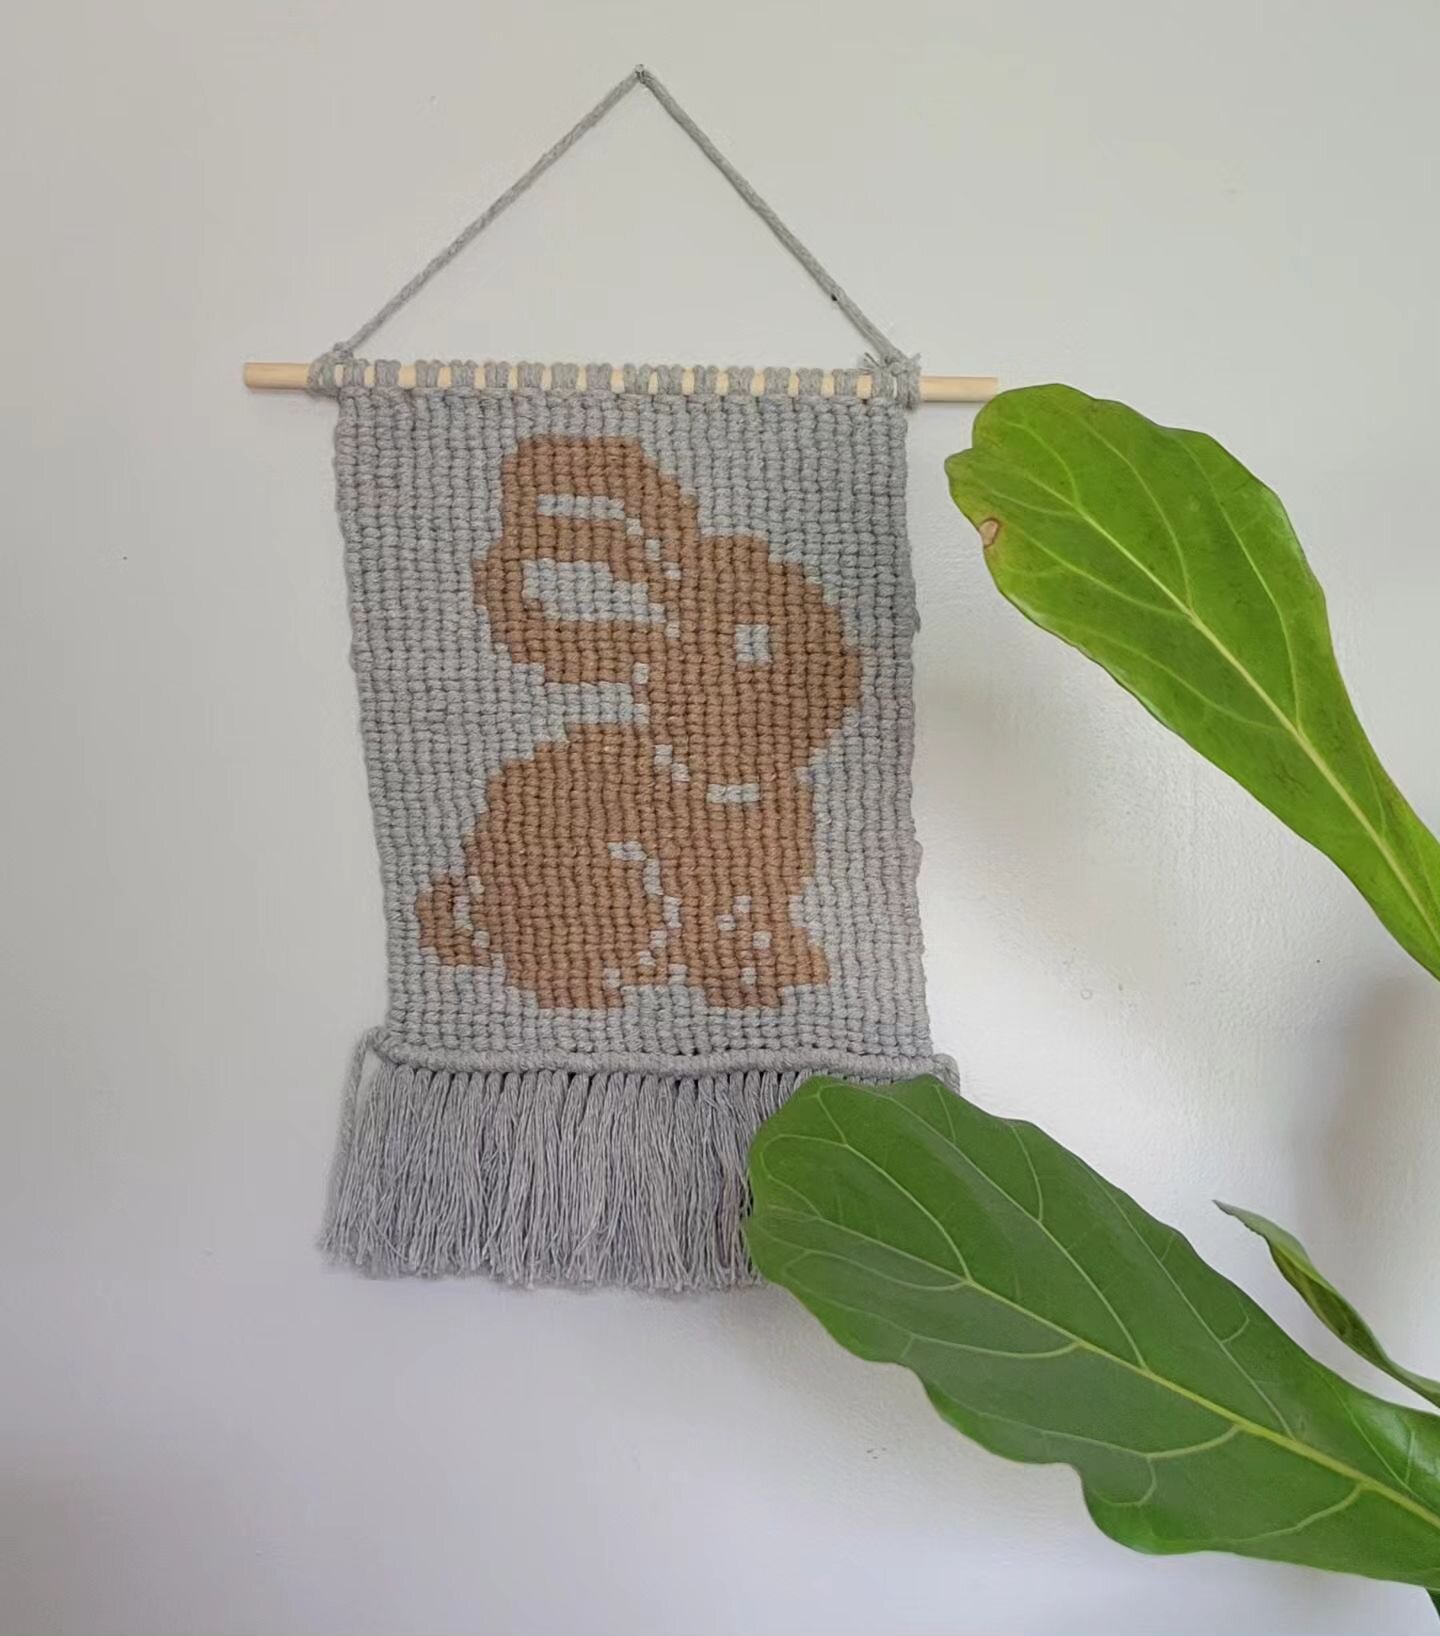 I've always thought this bunny would be adorable in a baby's nursery 🐇👶

I made this over a year ago when I was first learning the pixel method, so the back isn't pretty, and it has a bit of lean on the edges. 

The material is soft, and the fringe